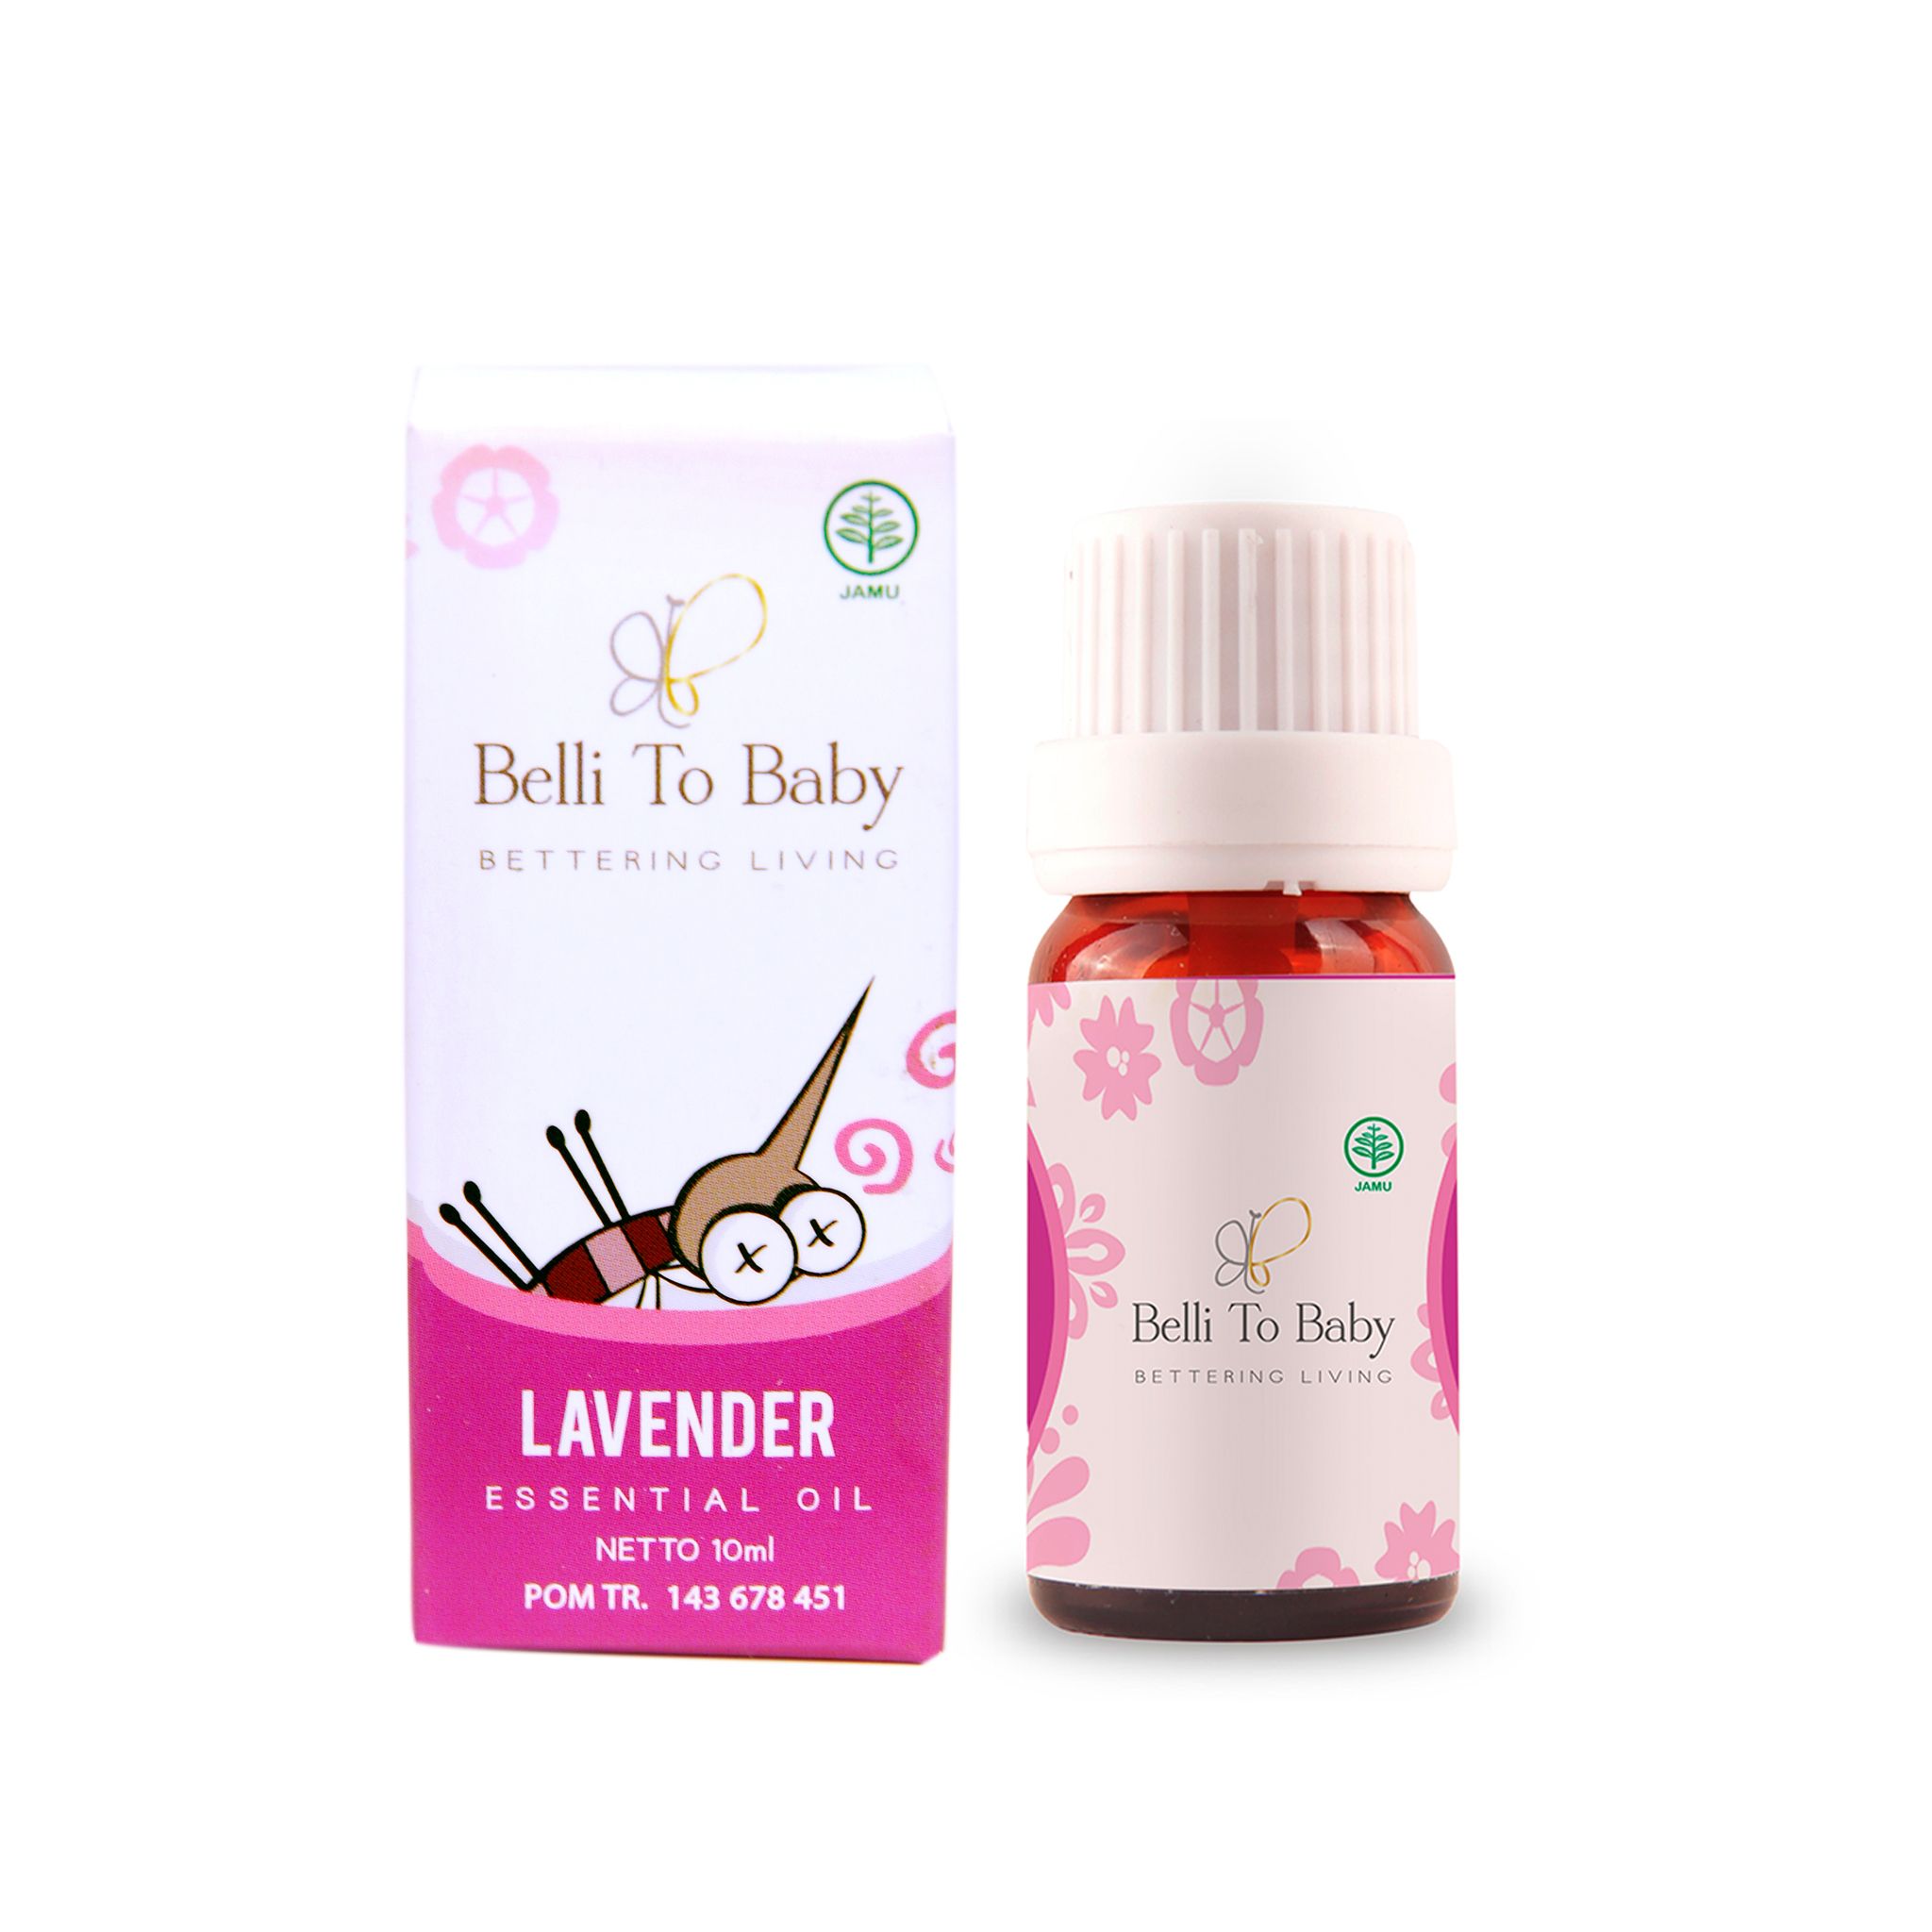 Belli To Baby Essential Oil Lavender 10ml - 2